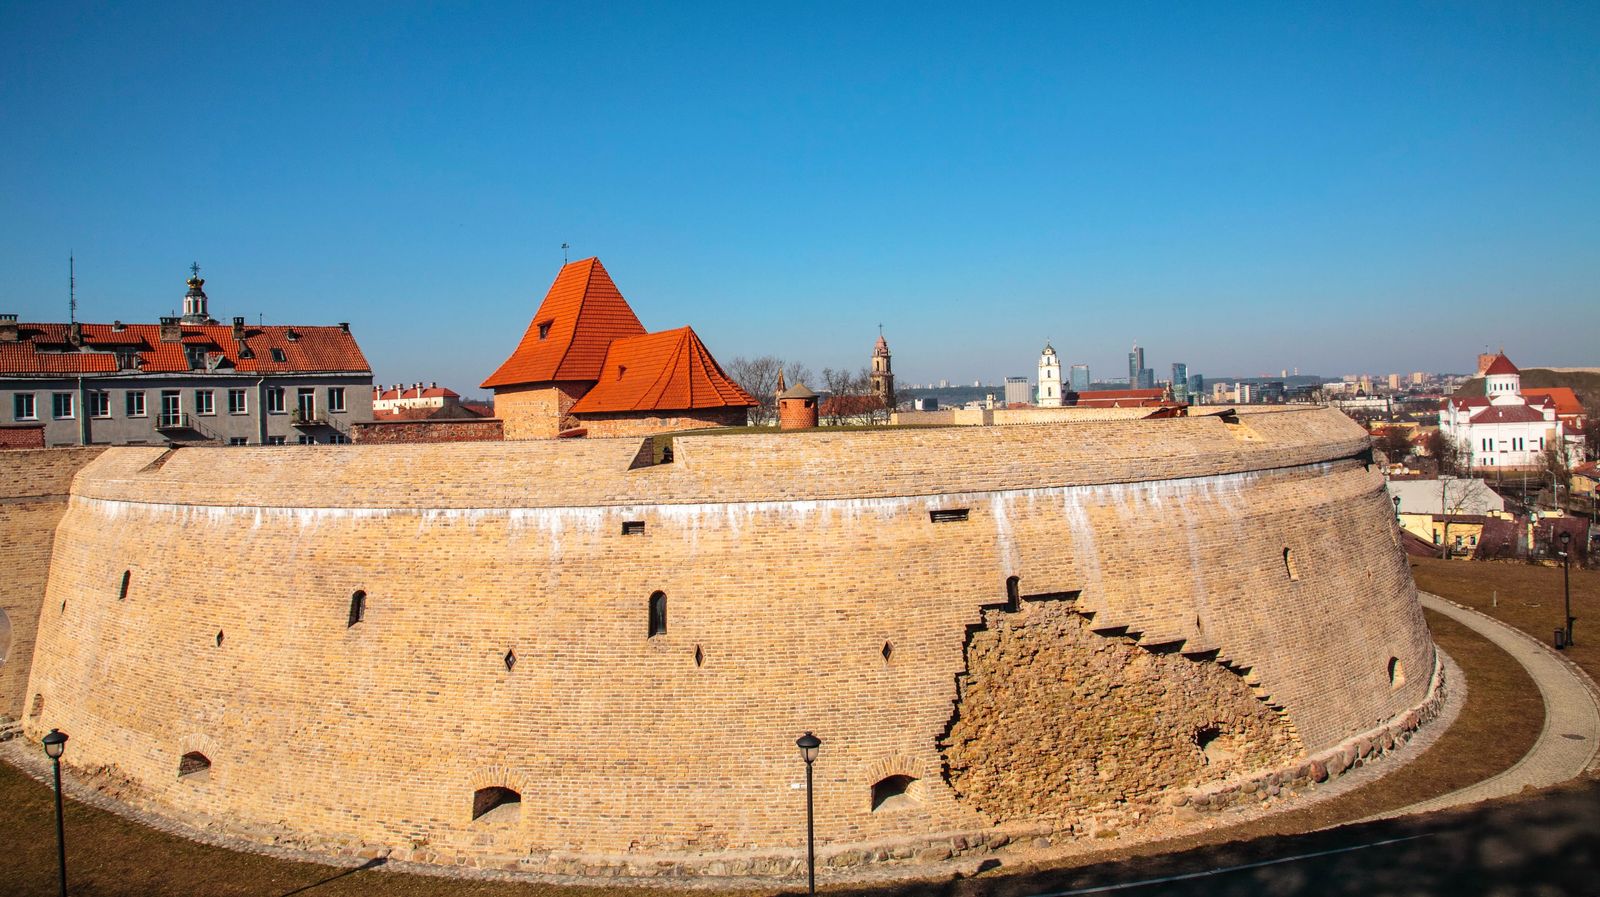 Vilnius Bastion, Large round brick structure at least three stories high